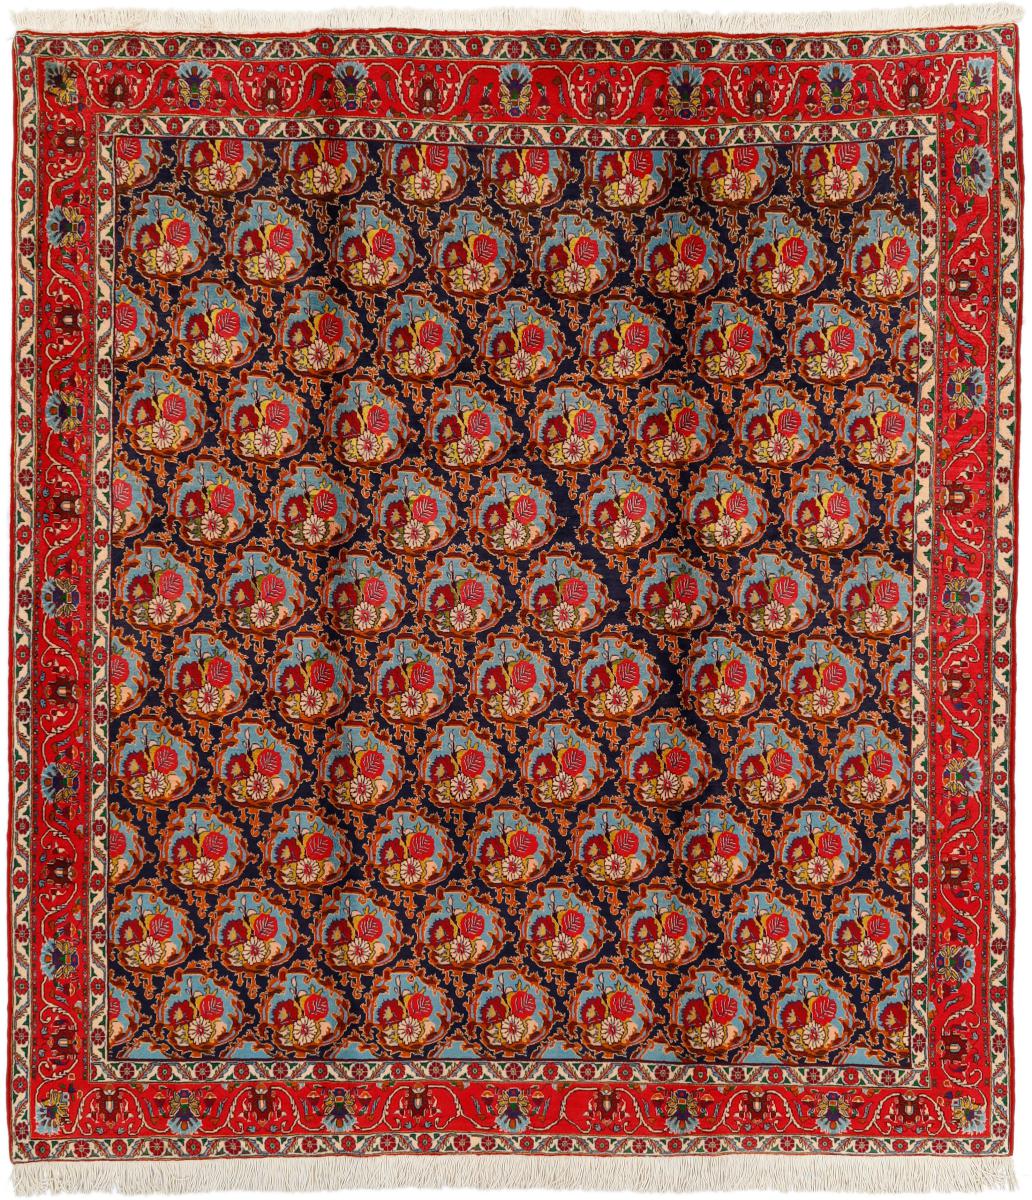 Persian Rug Senneh 9'4"x8'3" 9'4"x8'3", Persian Rug Knotted by hand